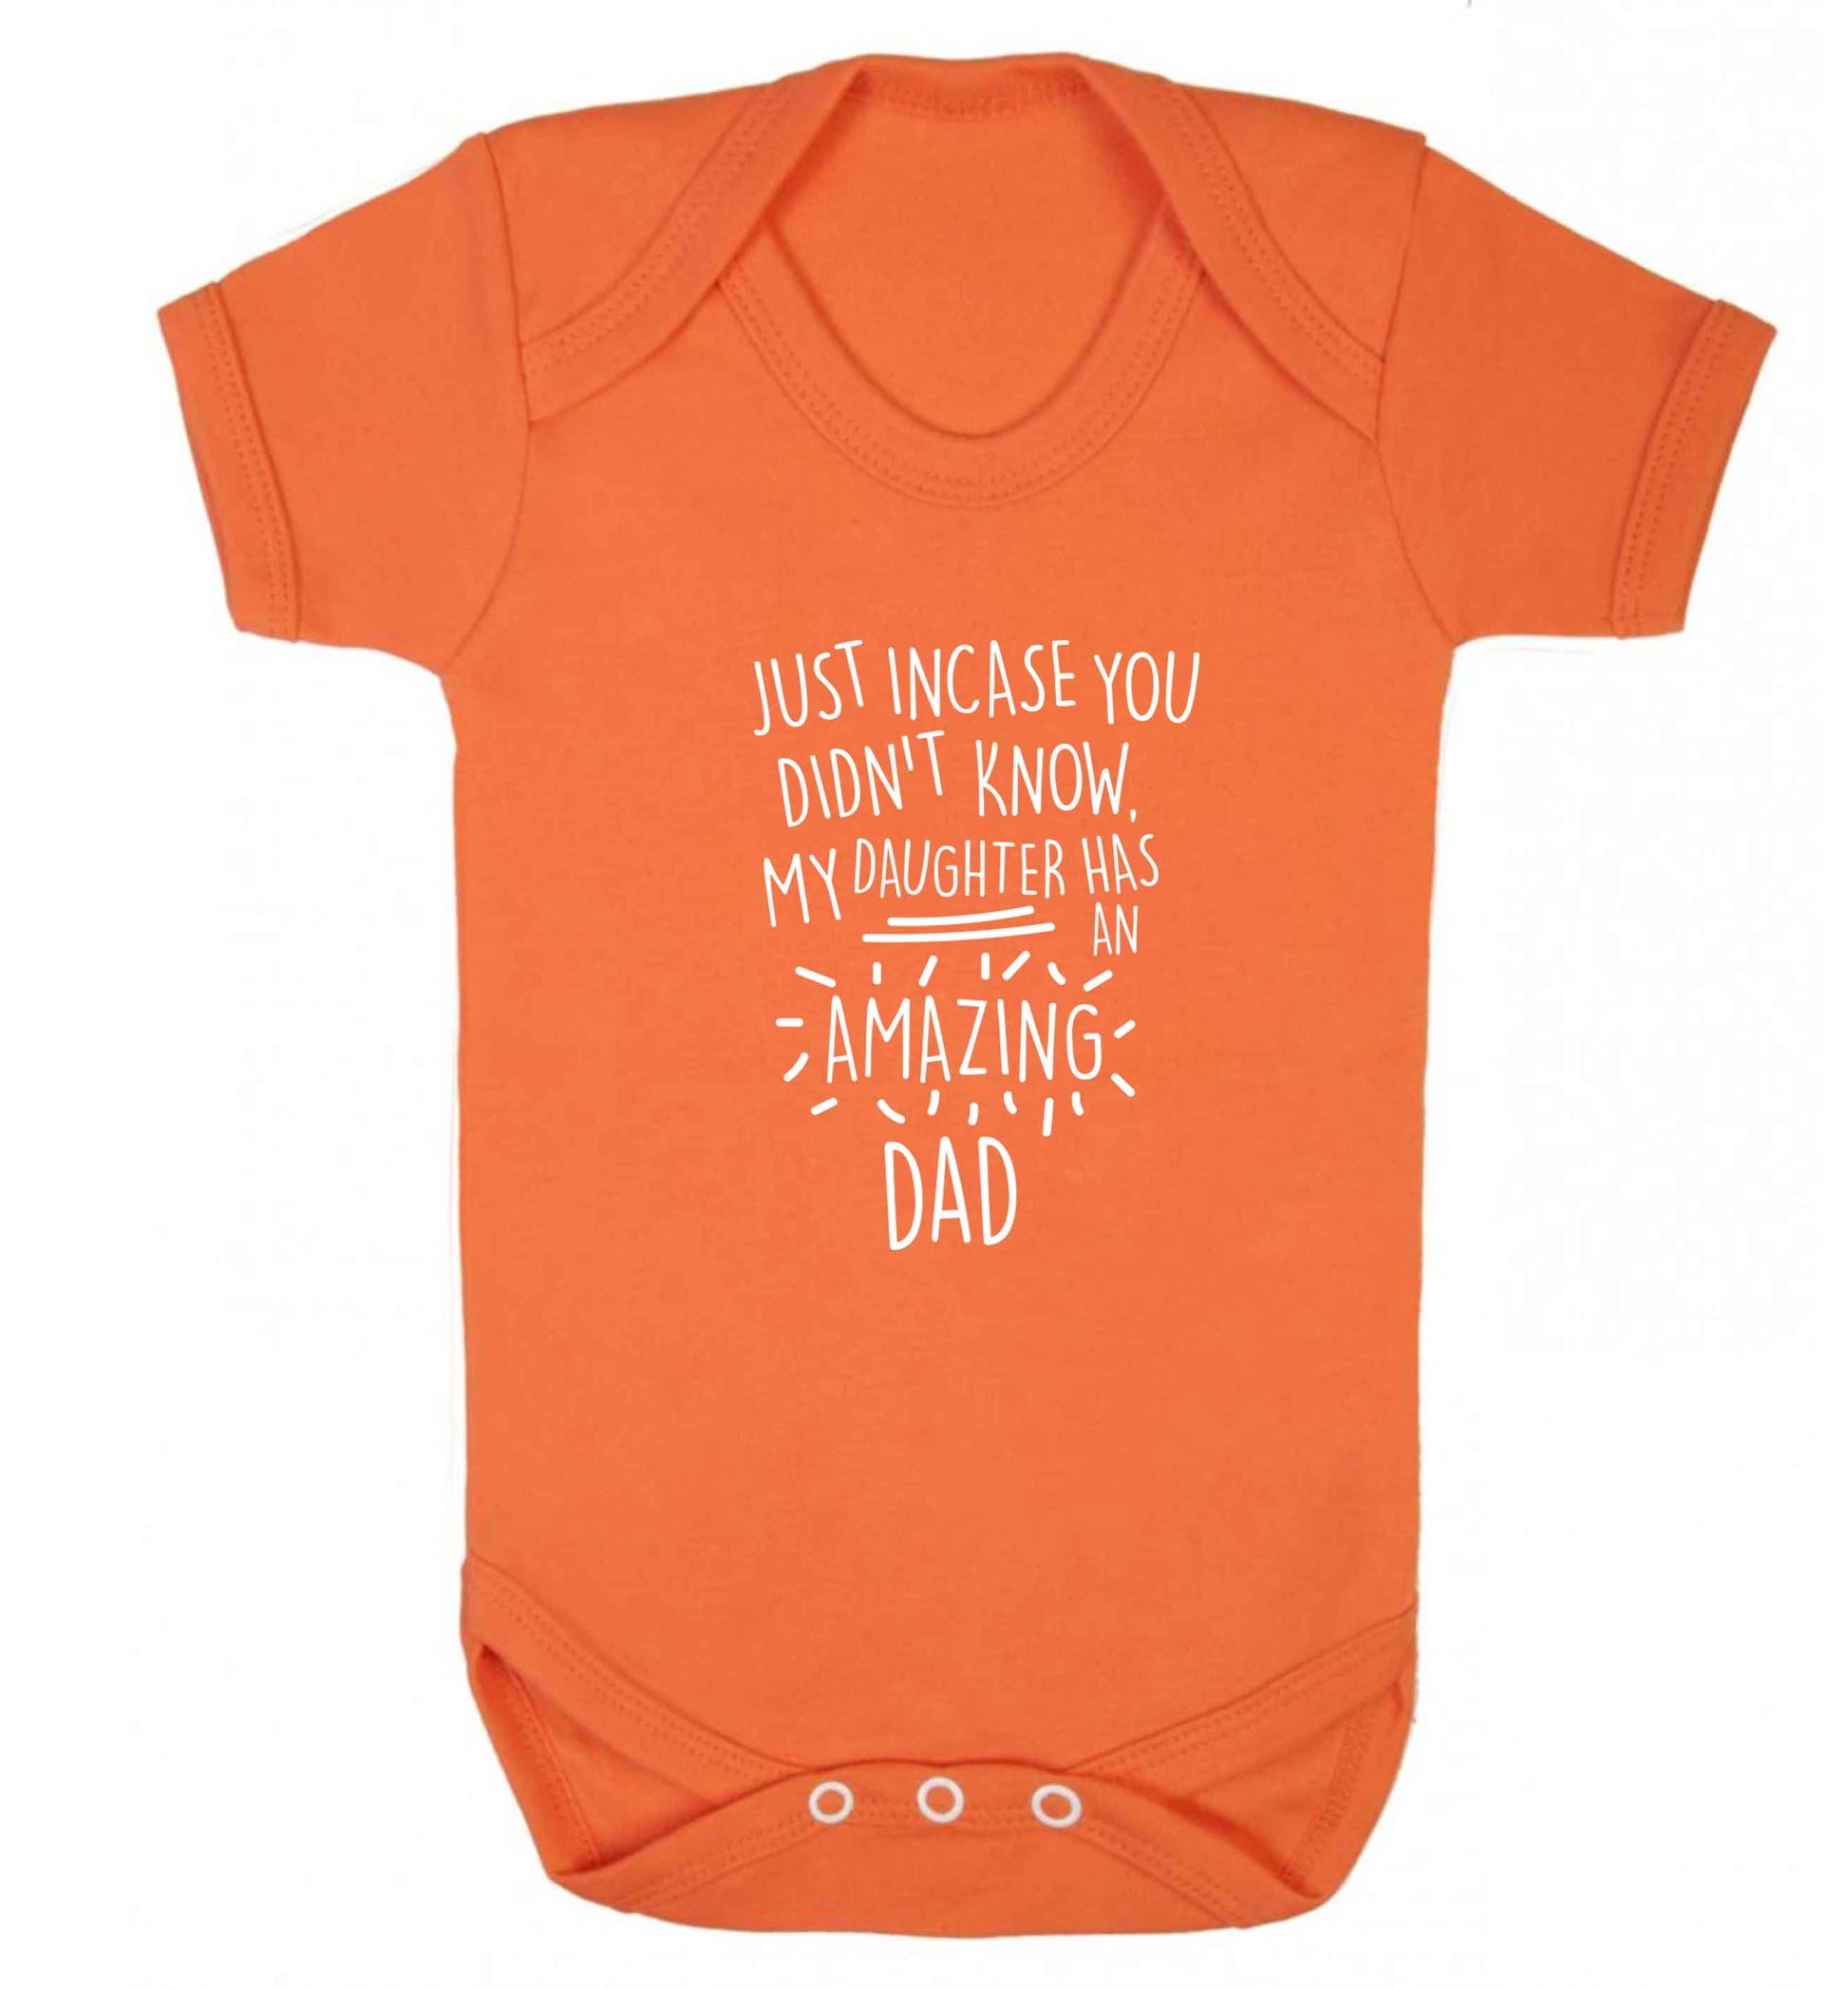 Just incase you didn't know my daughter has an amazing dad baby vest orange 18-24 months